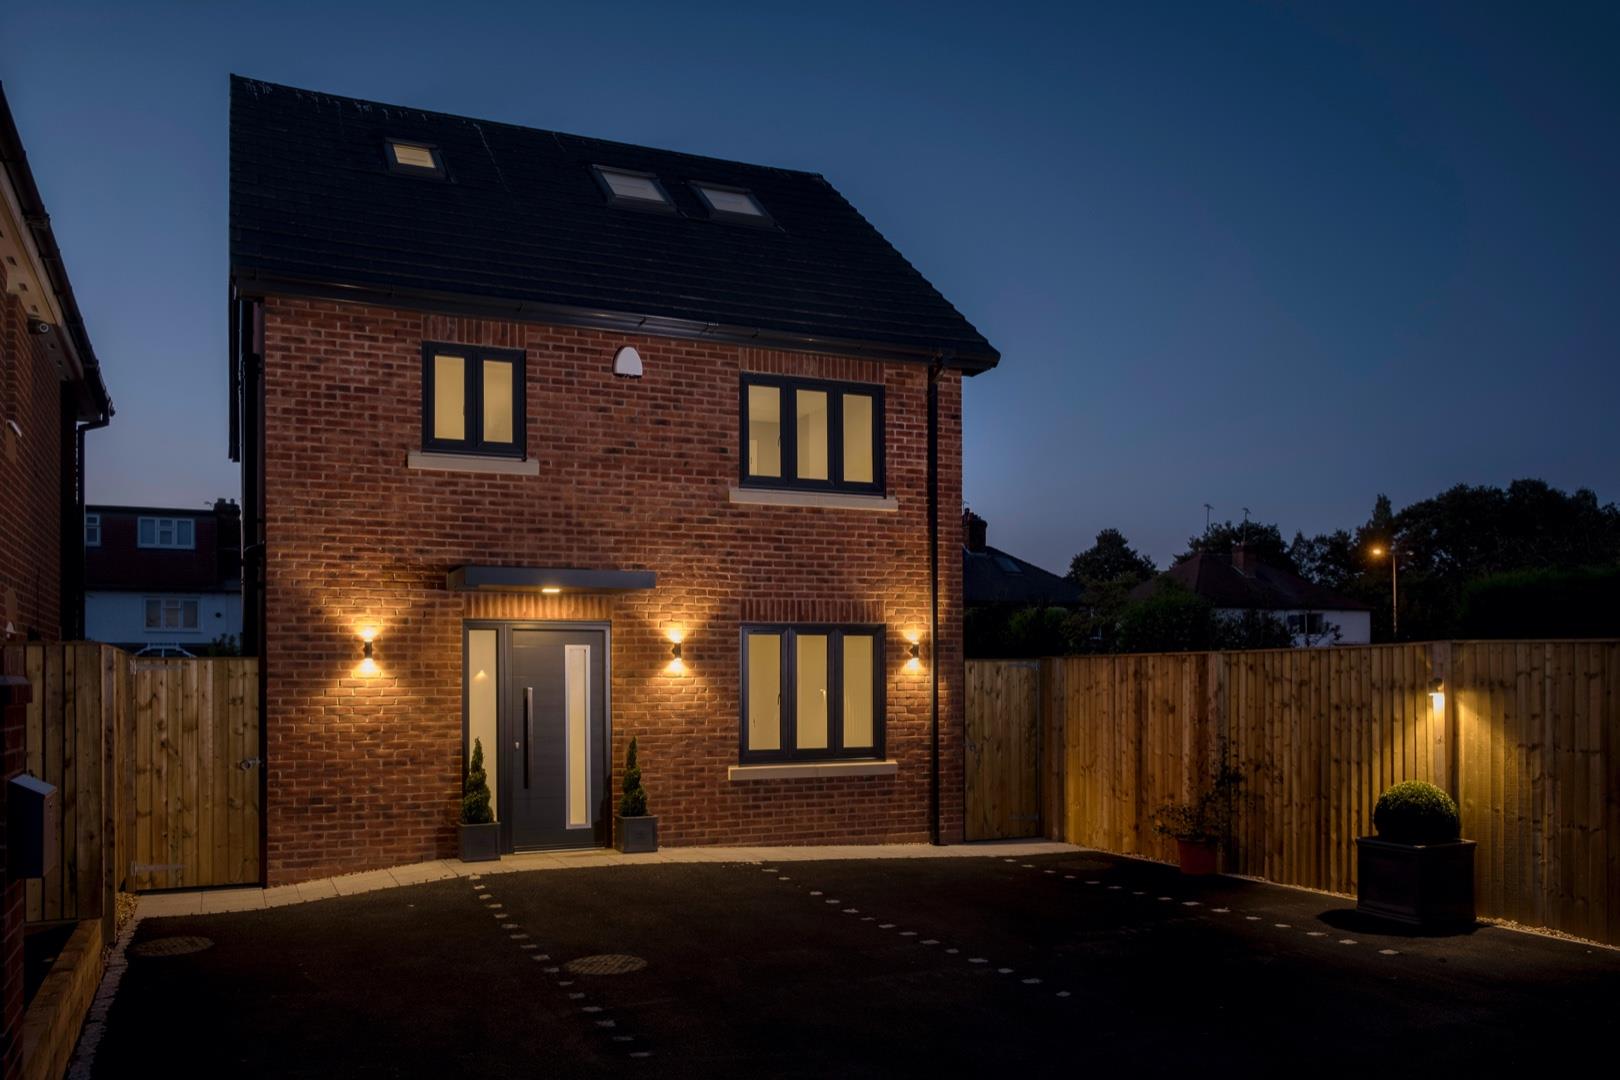 4 bedroom  Detached House for Sale in Hoole